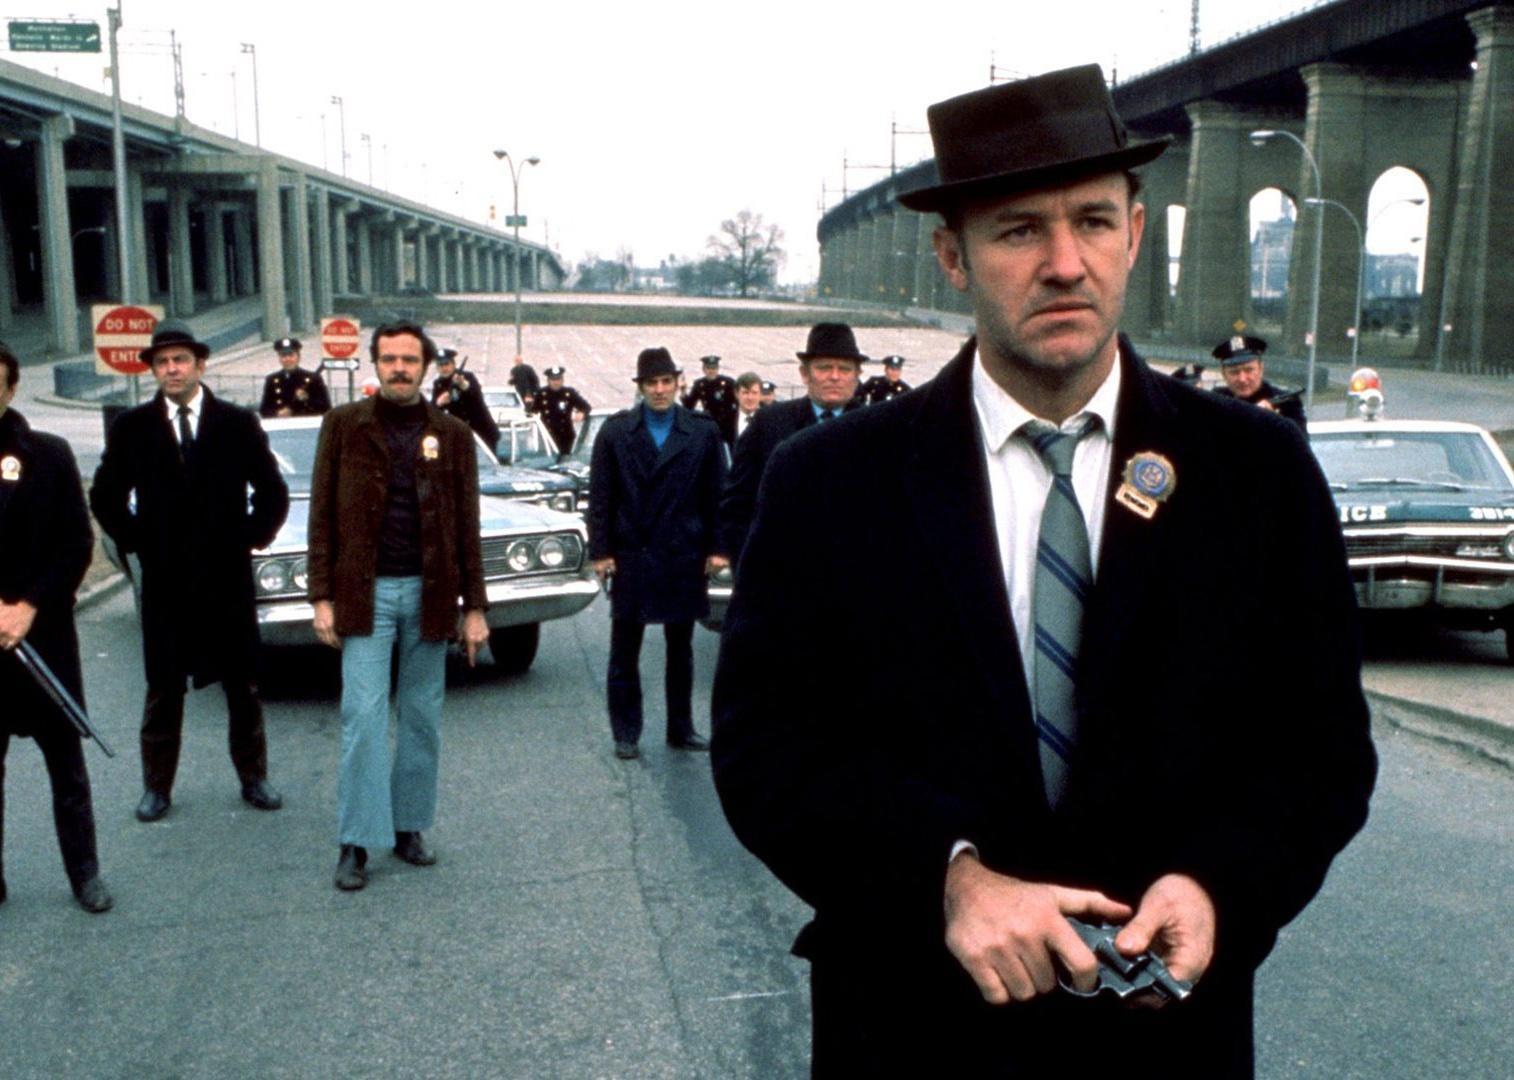 Gene Hackman leads a team of policemen standing in front of police cars.